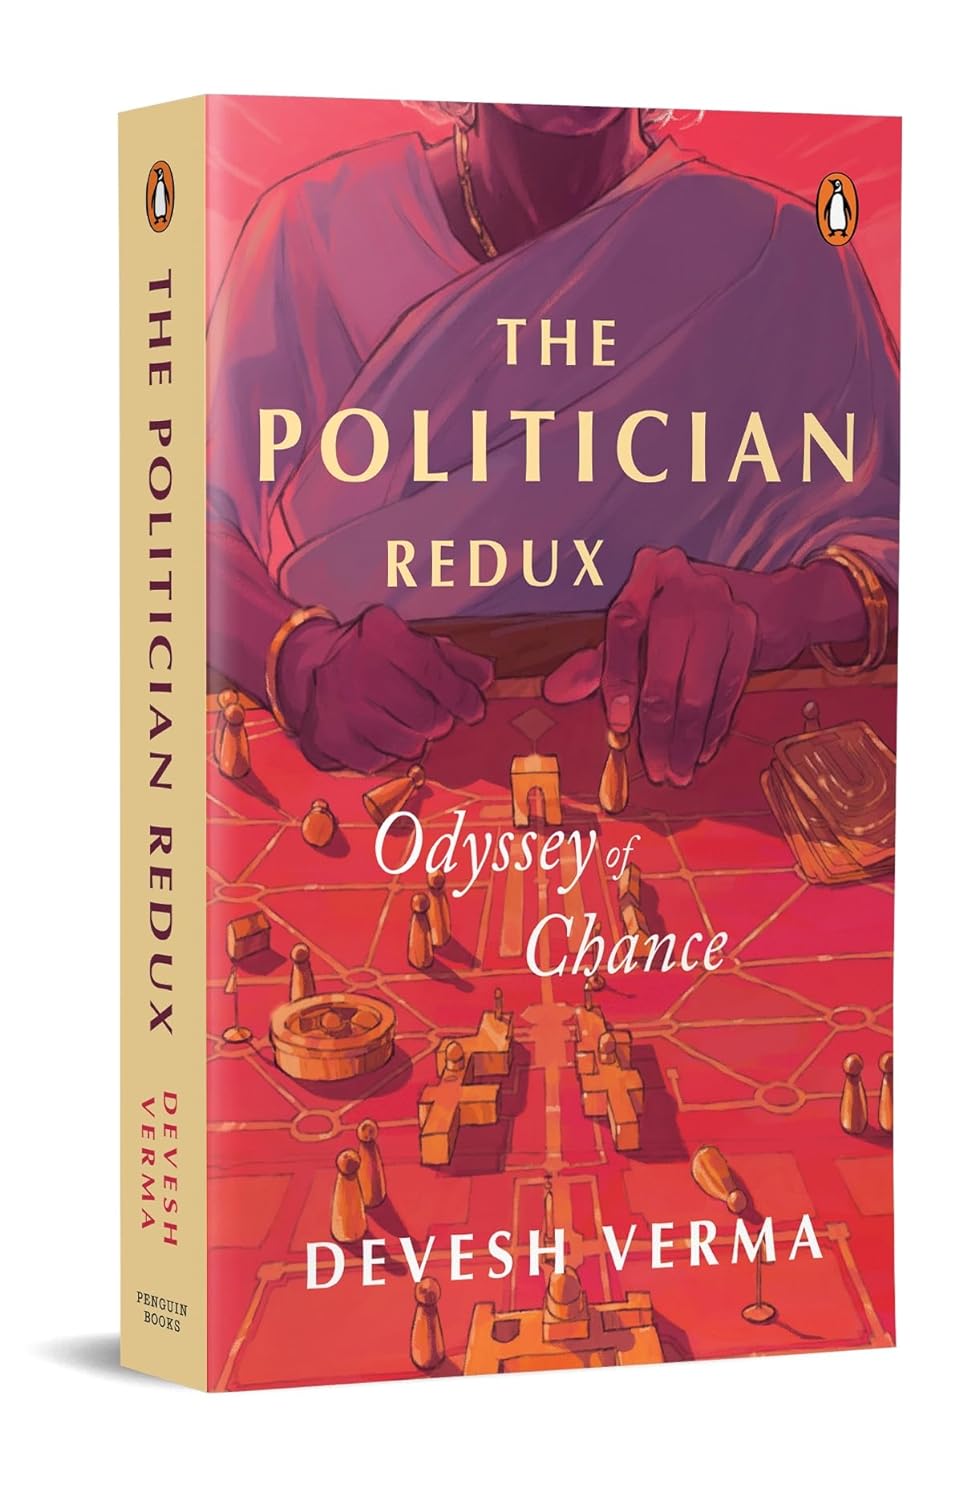 The Politician Redux: Odyssey of Chance